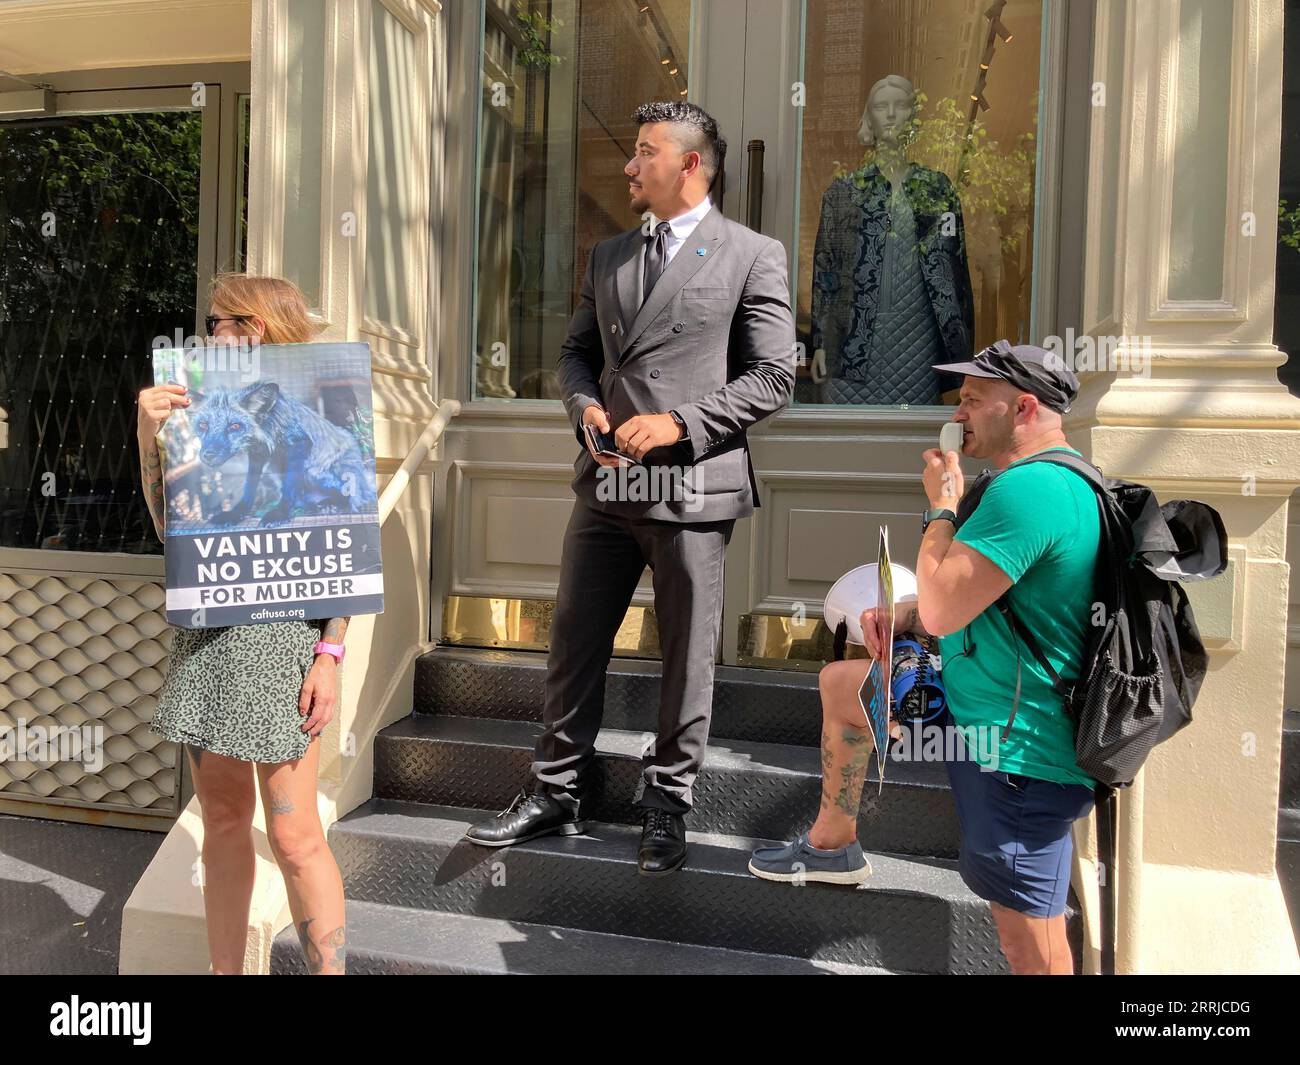 Animal rights activists protest the use of fur in front of the Louis Vuitton store in Soho in New York on Sunday, August 27, 2023. (© Frances M. Roberts) Stock Photo